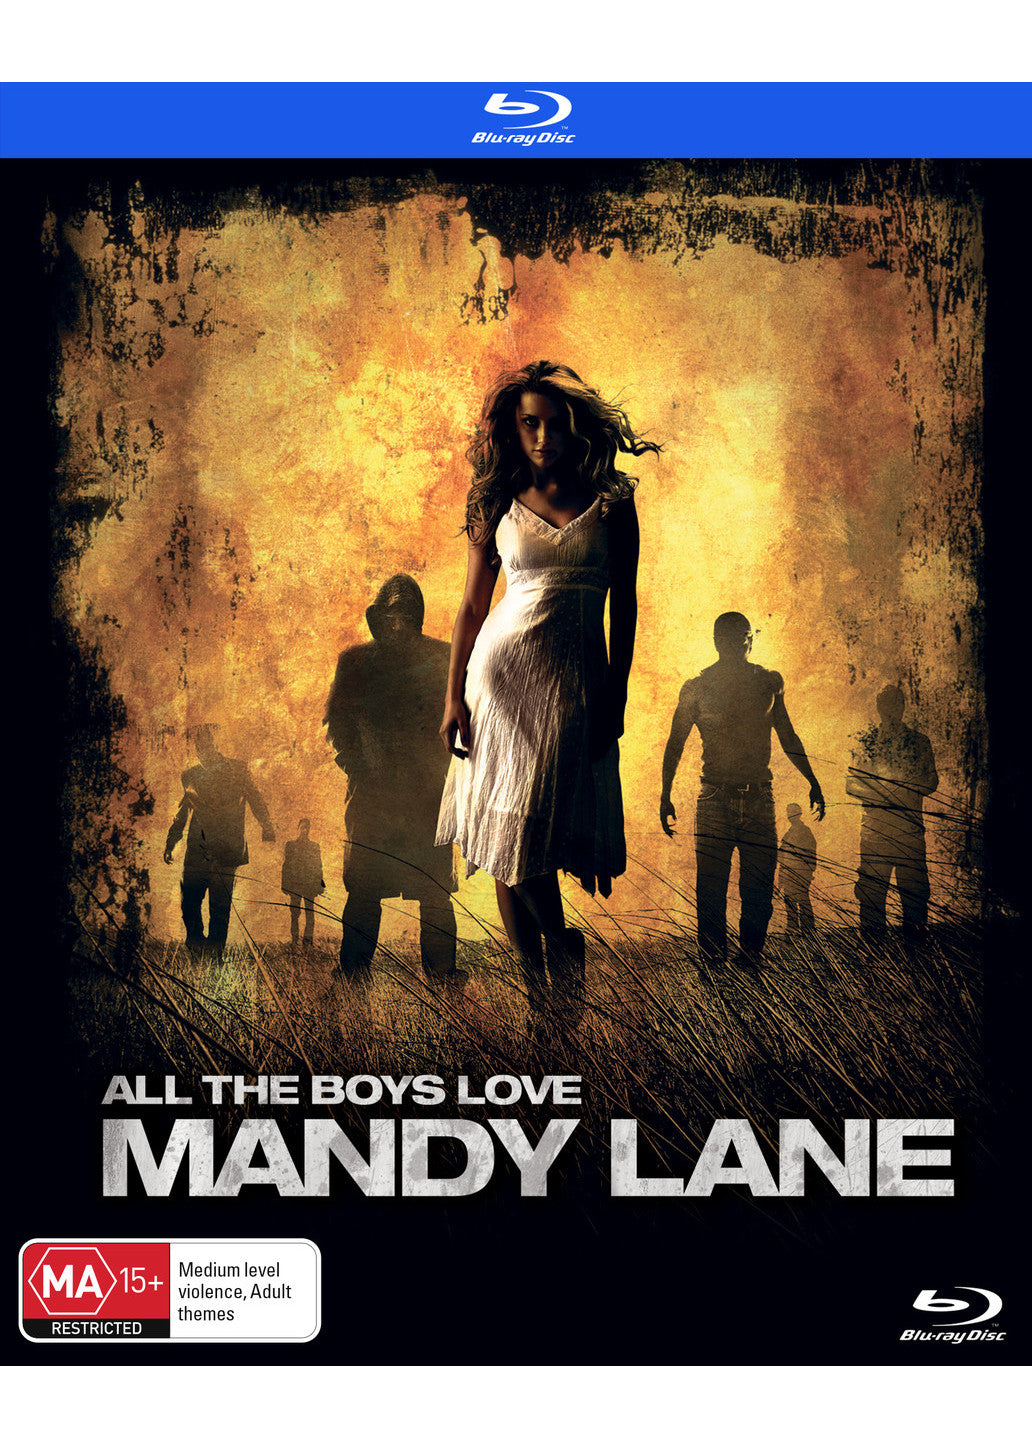 ALL THE BOYS LOVE MANDY LANE - SPECIAL EDITION BLU-RAY